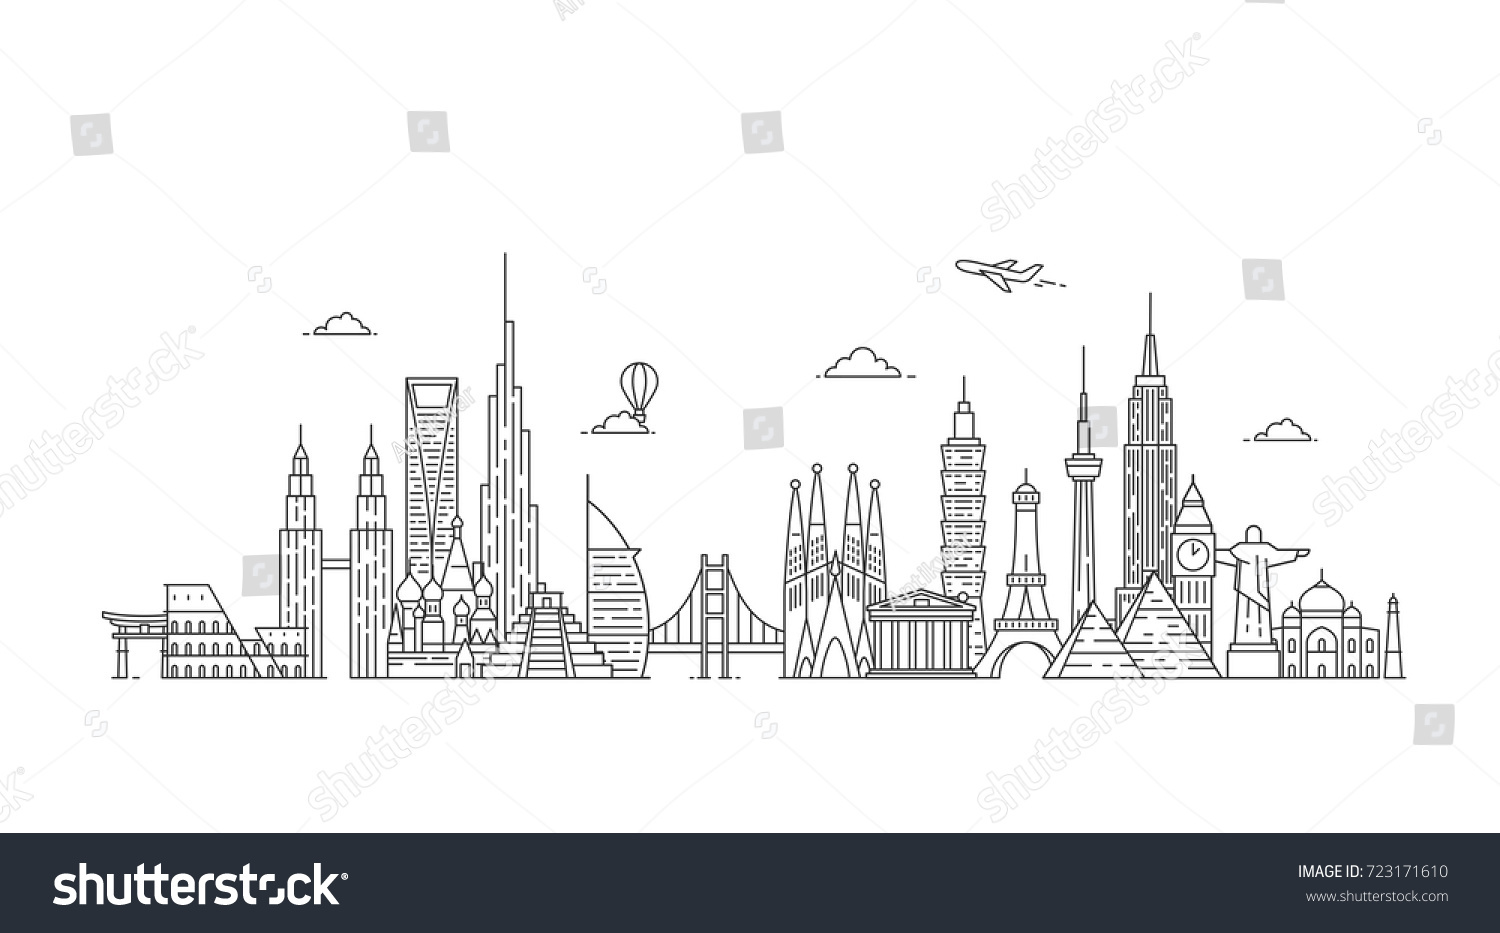 World skyline. Travel and tourism background. Famous buildings and monuments.